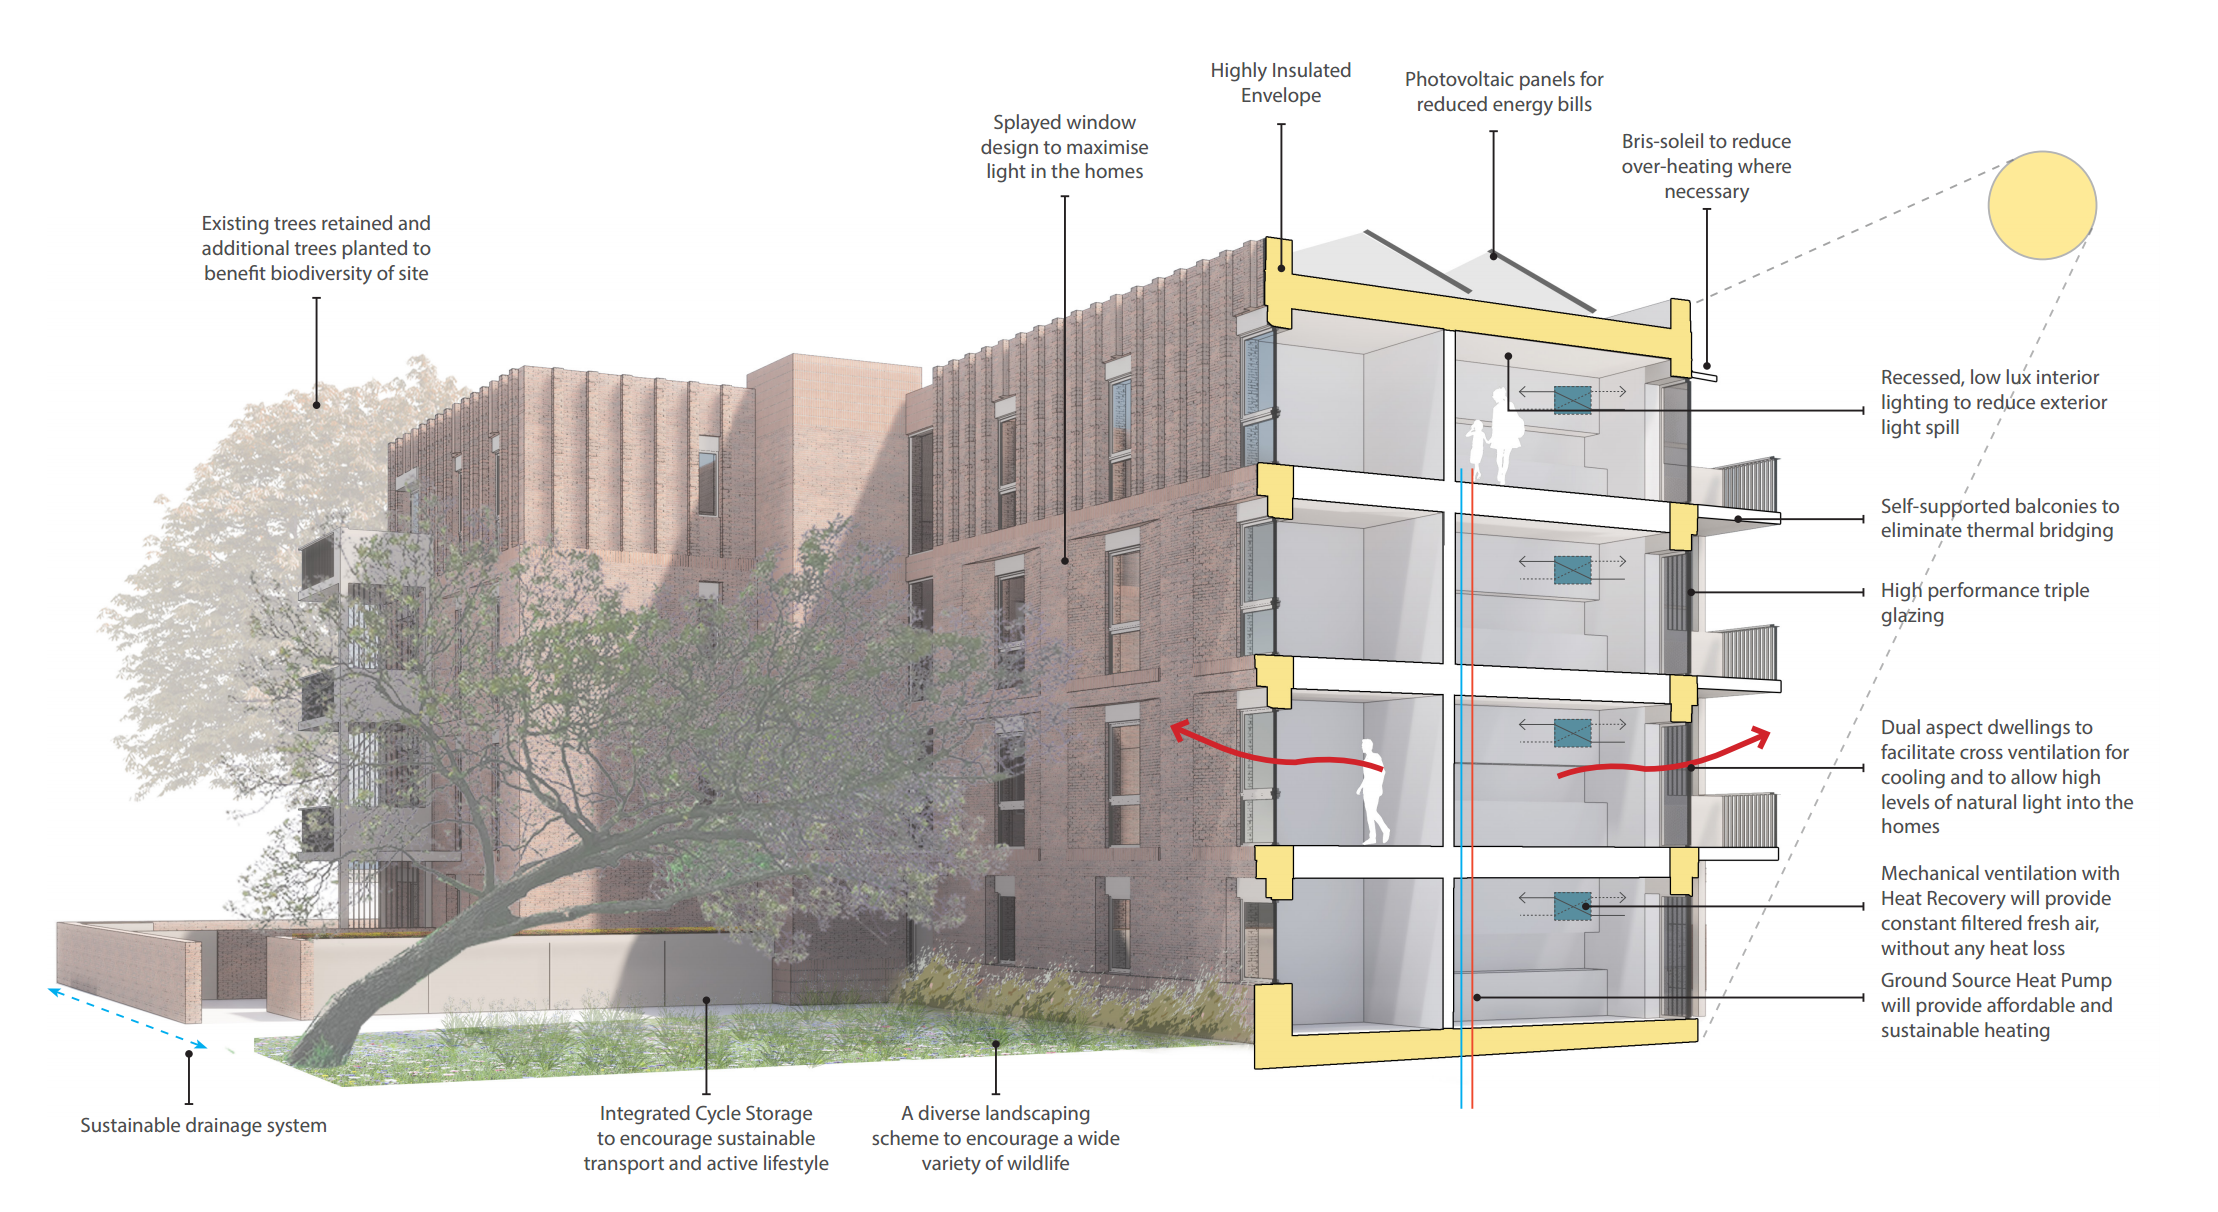 This image shows a cross section of the building, highlighting particular sustainable features of the design, such as the photovoltaic panels on the roof, dual aspect dwellings to facilitate cross ventilation for cooling, and self supported balconies to eliminate thermal bridging